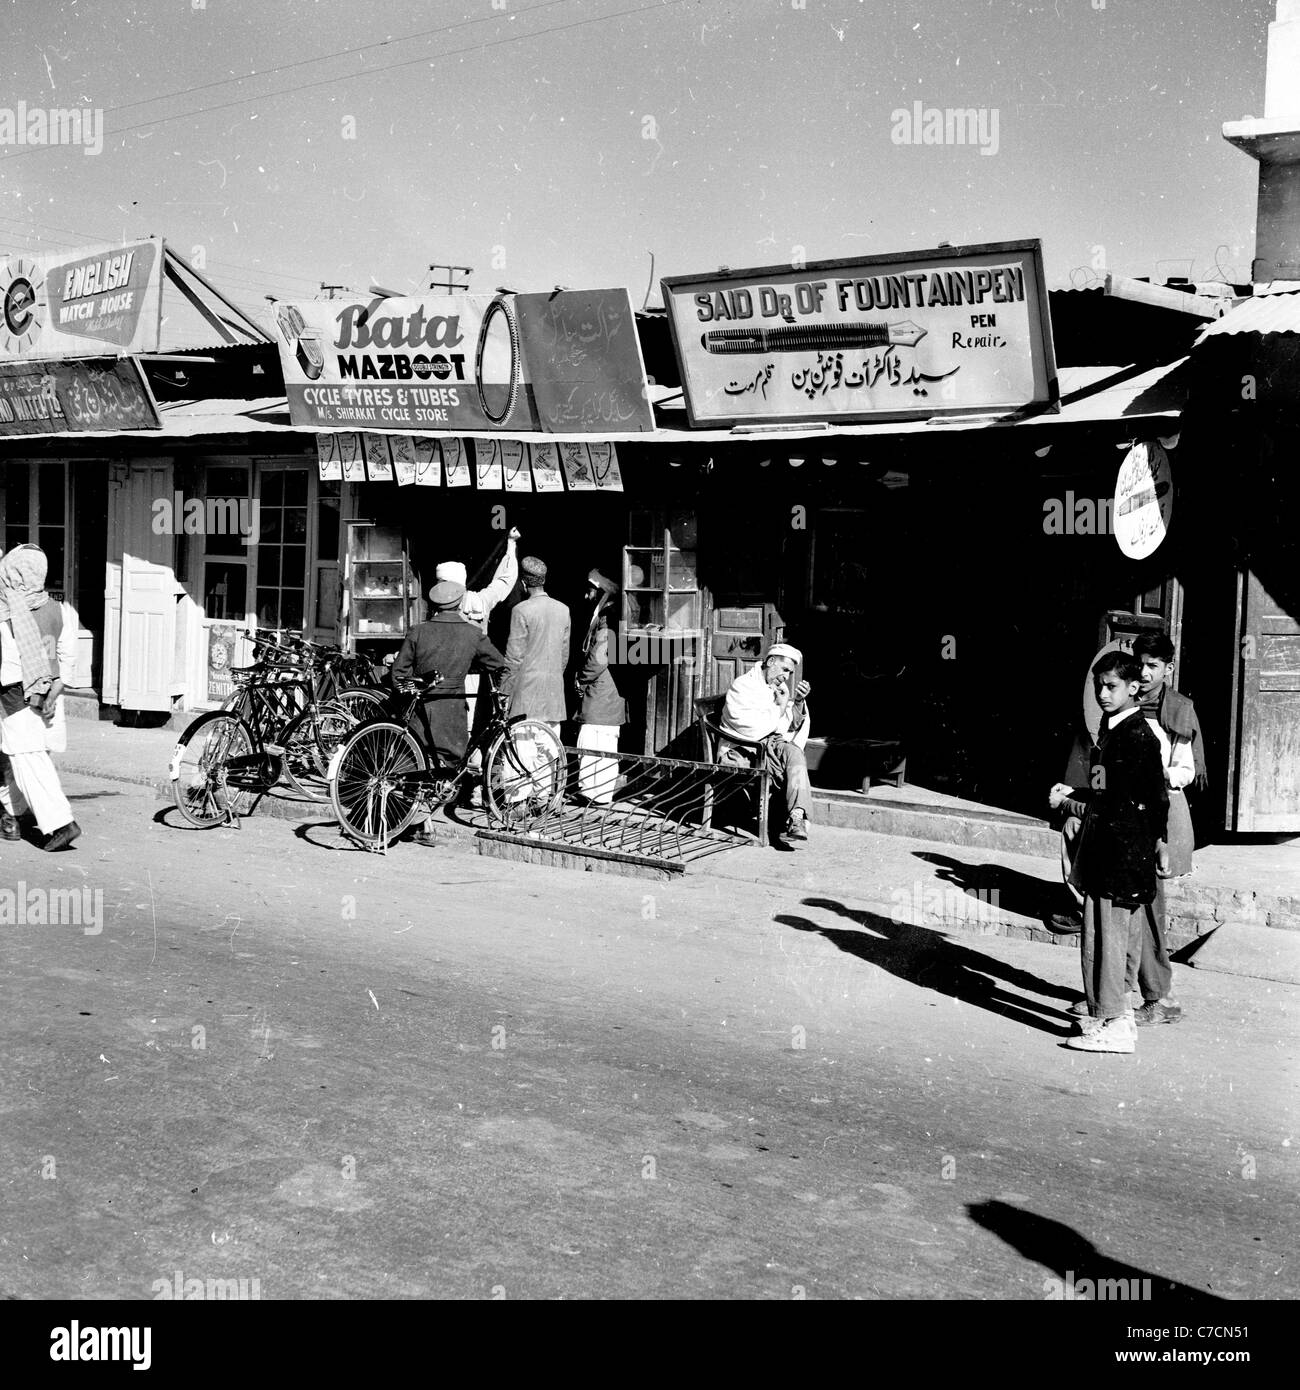 Exterior of bicycle repair shop, Shah Iqbal Street, Quetta, Pakistan, taken in the 1950s by J. Allan Cash. Stock Photo